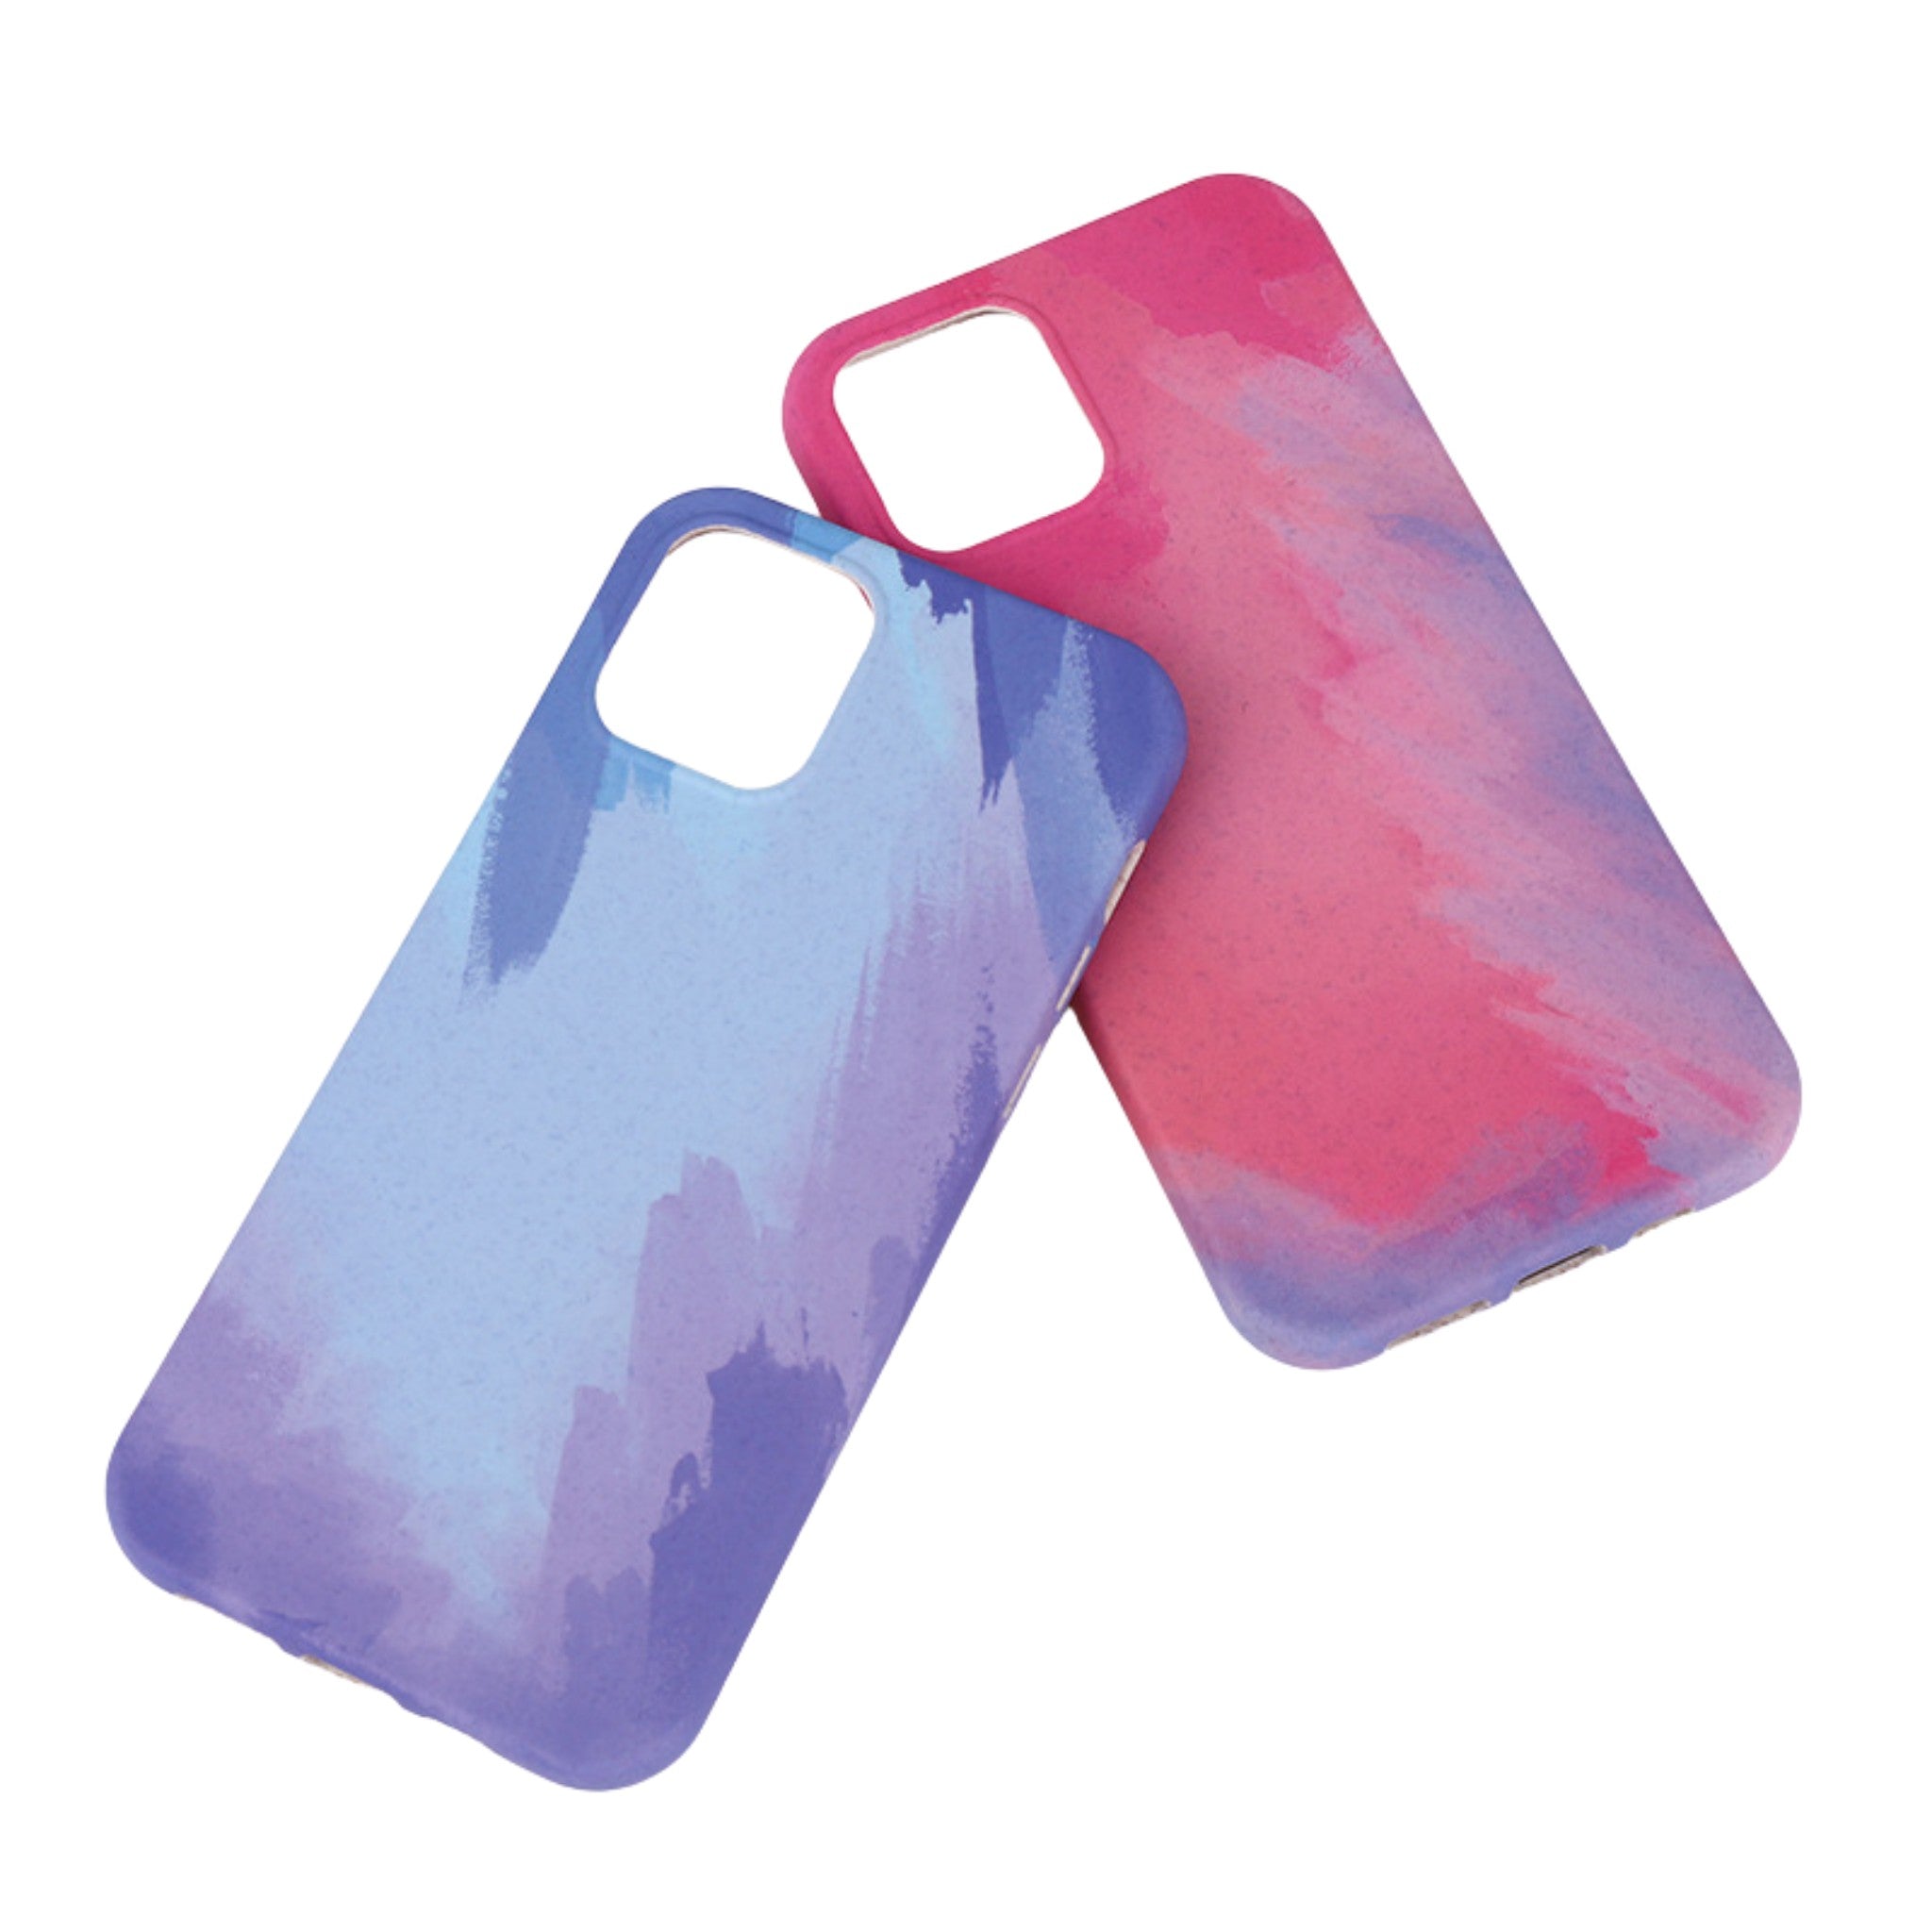 Biodegradable Frosted Oil Painting Phone Case Anacotte